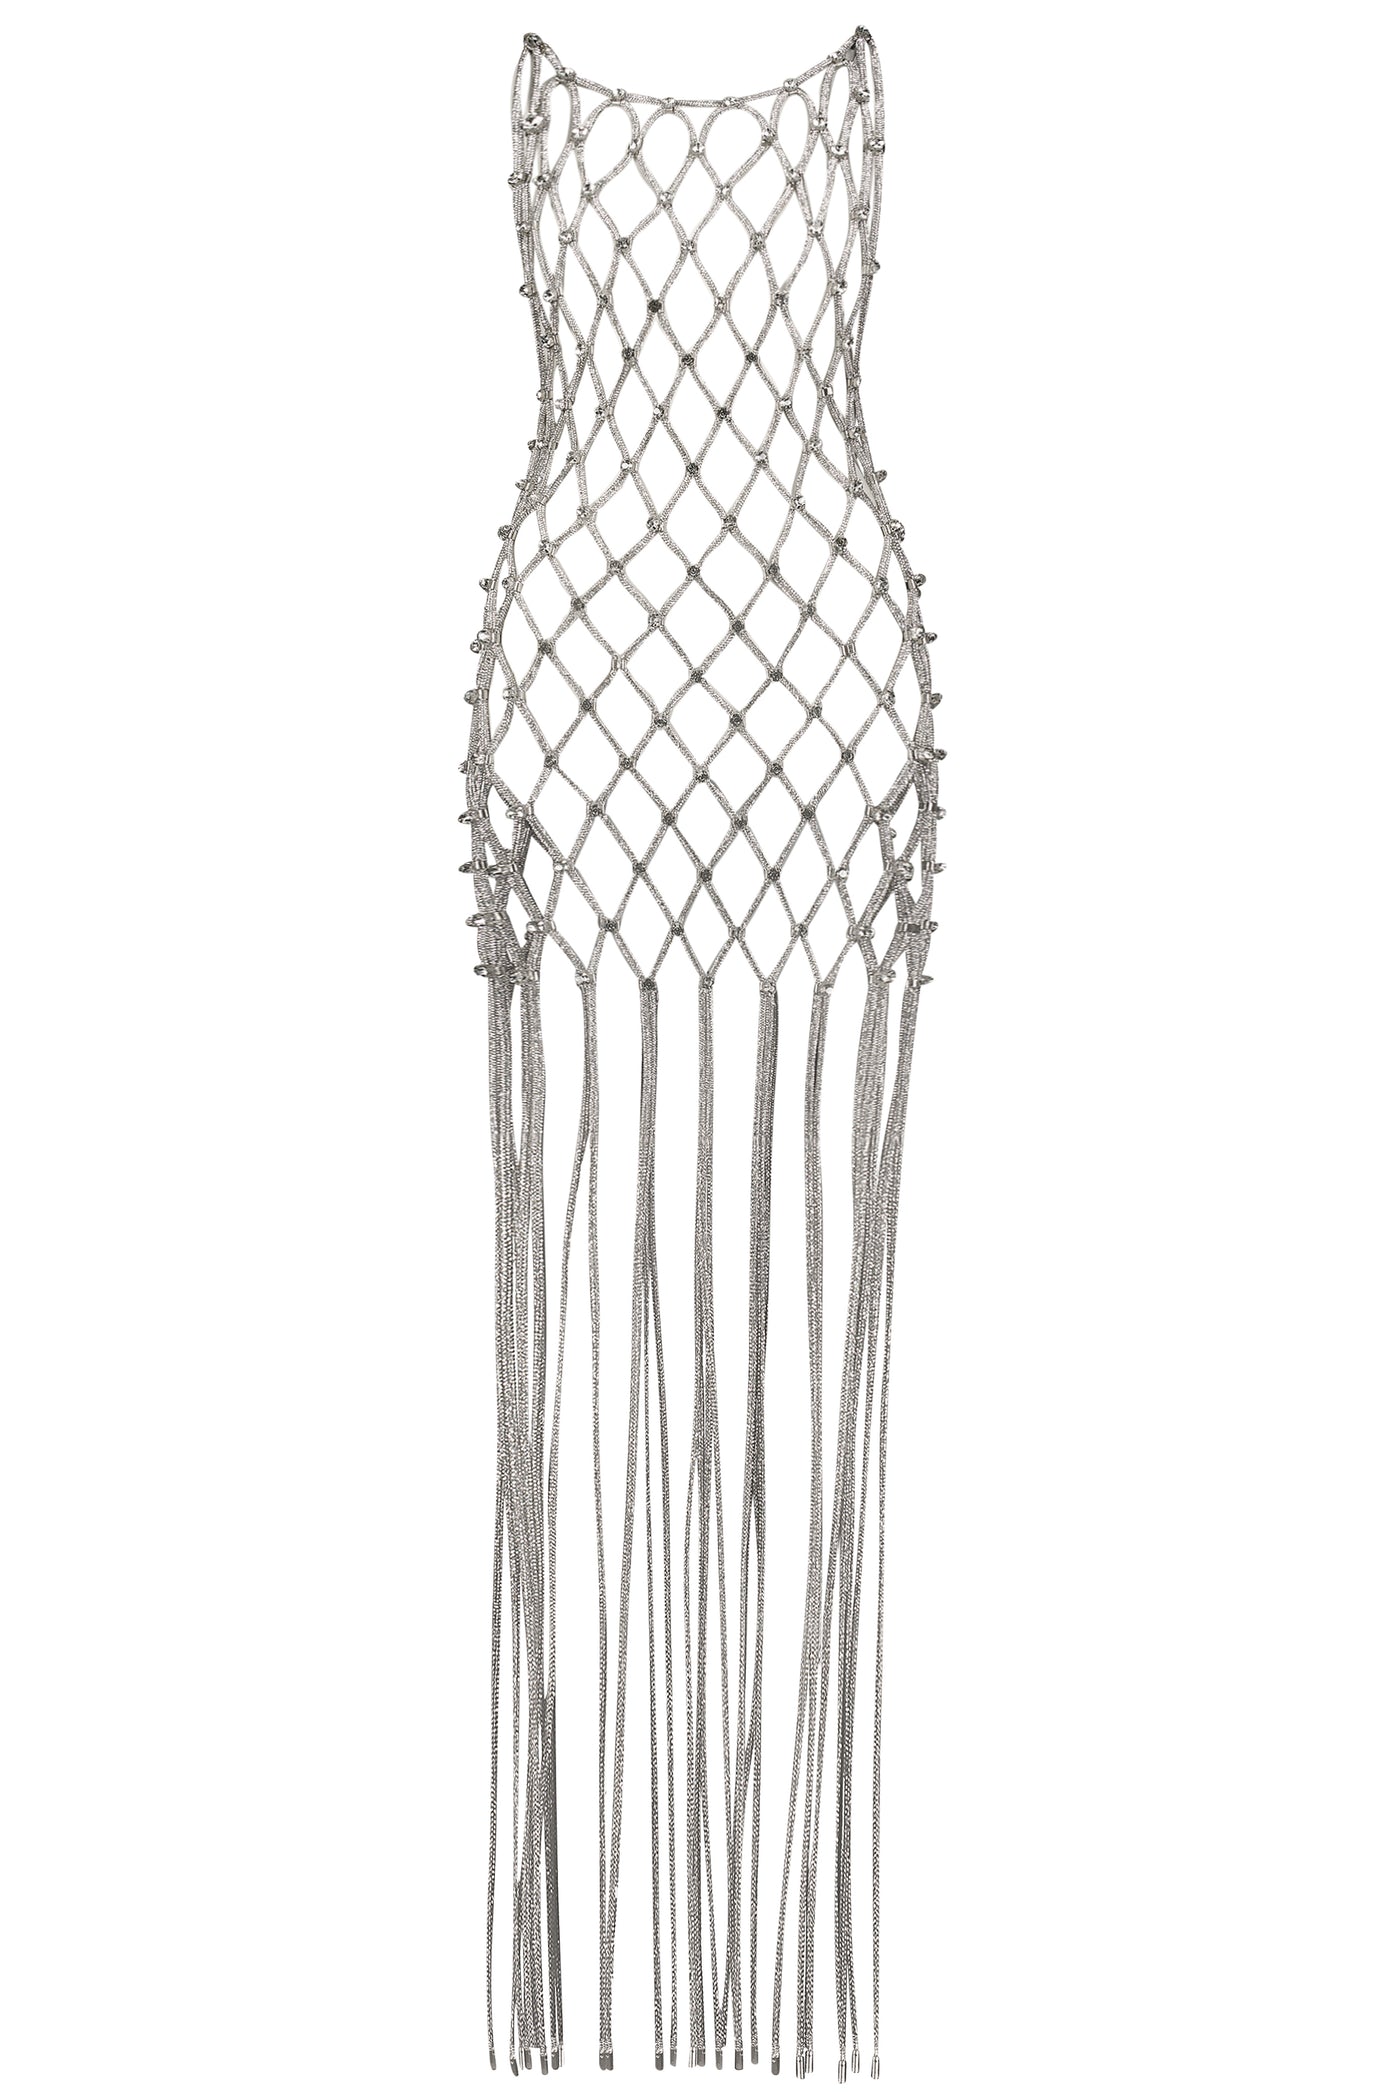 DOMINQUE CRYSTAL ROPE DRESS